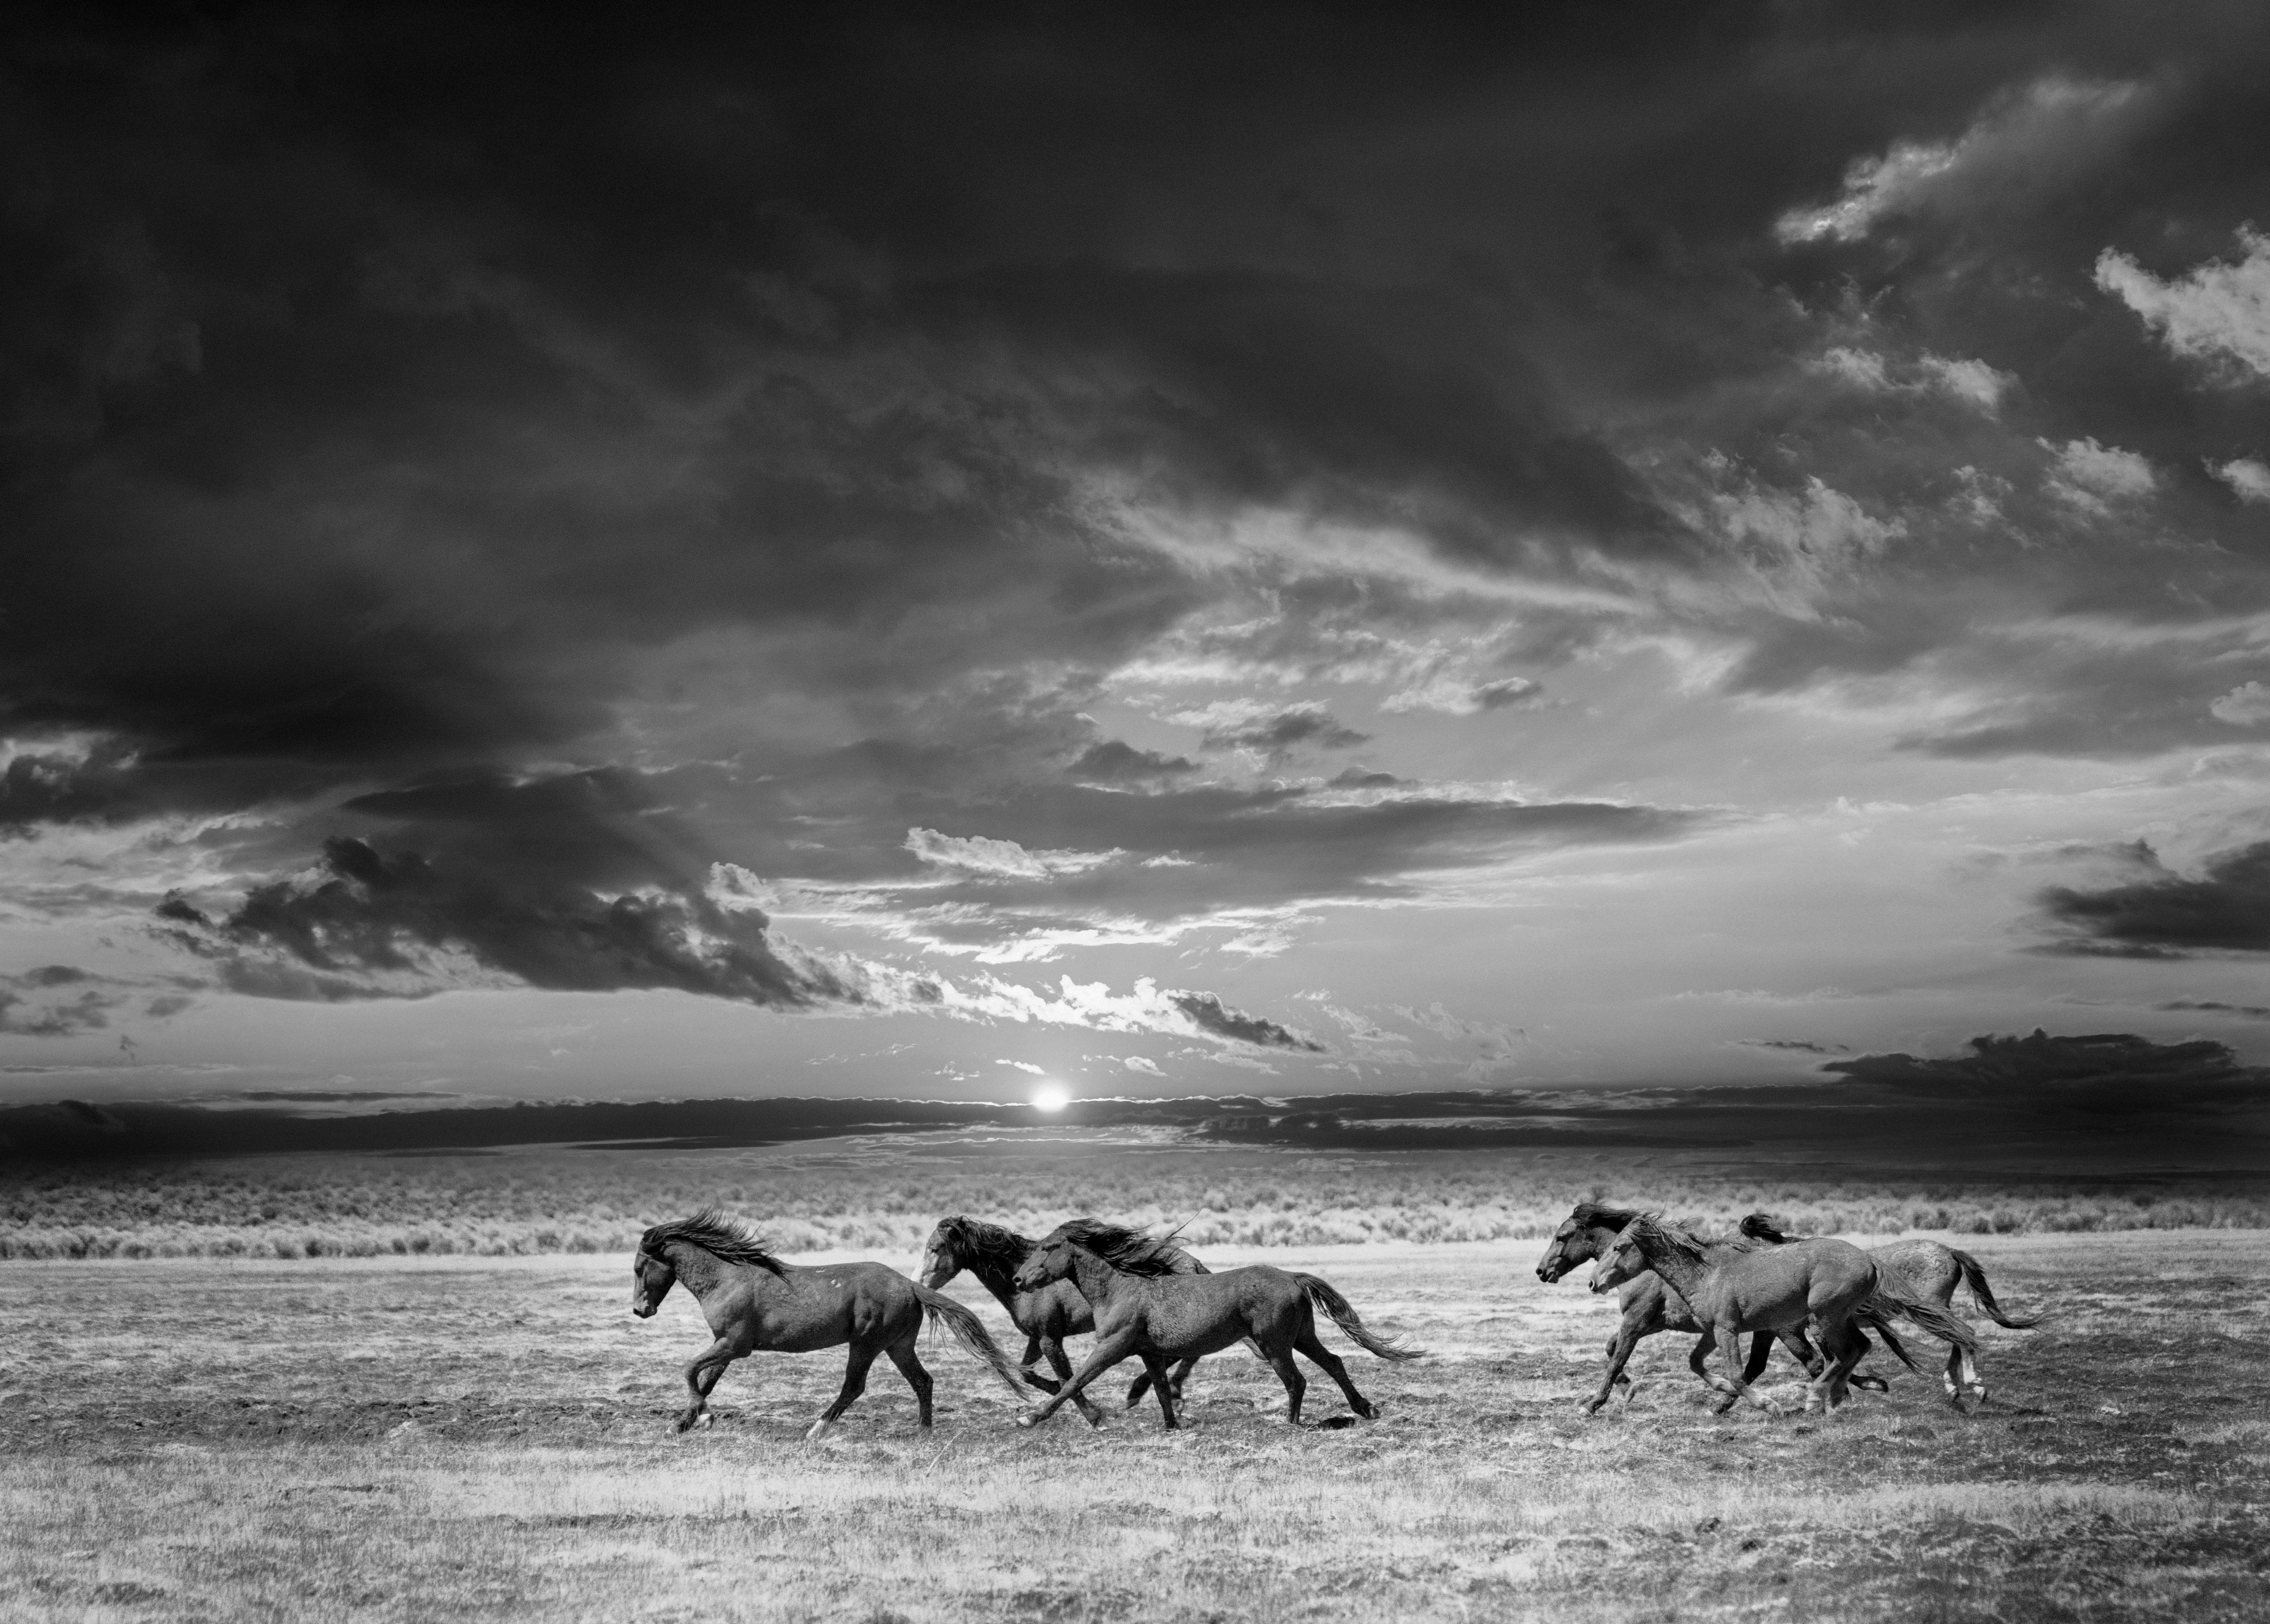 Shane Russeck Black and White Photograph - "Chasing the Light" 60x40- Black & White Photography Wild Horses Mustangs Print 